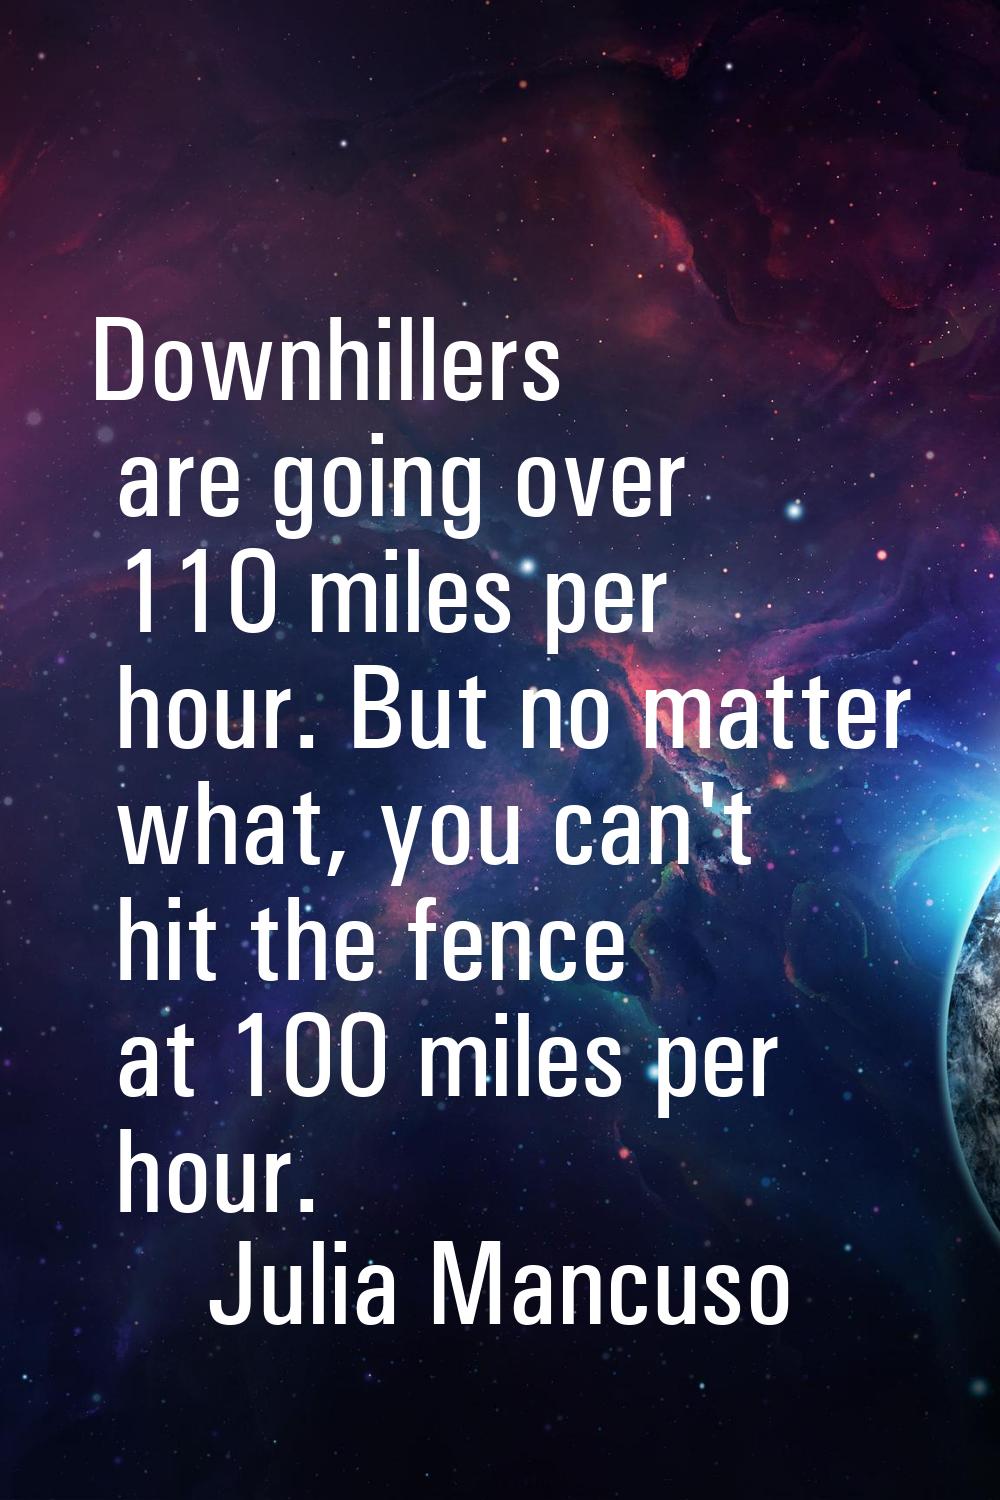 Downhillers are going over 110 miles per hour. But no matter what, you can't hit the fence at 100 m